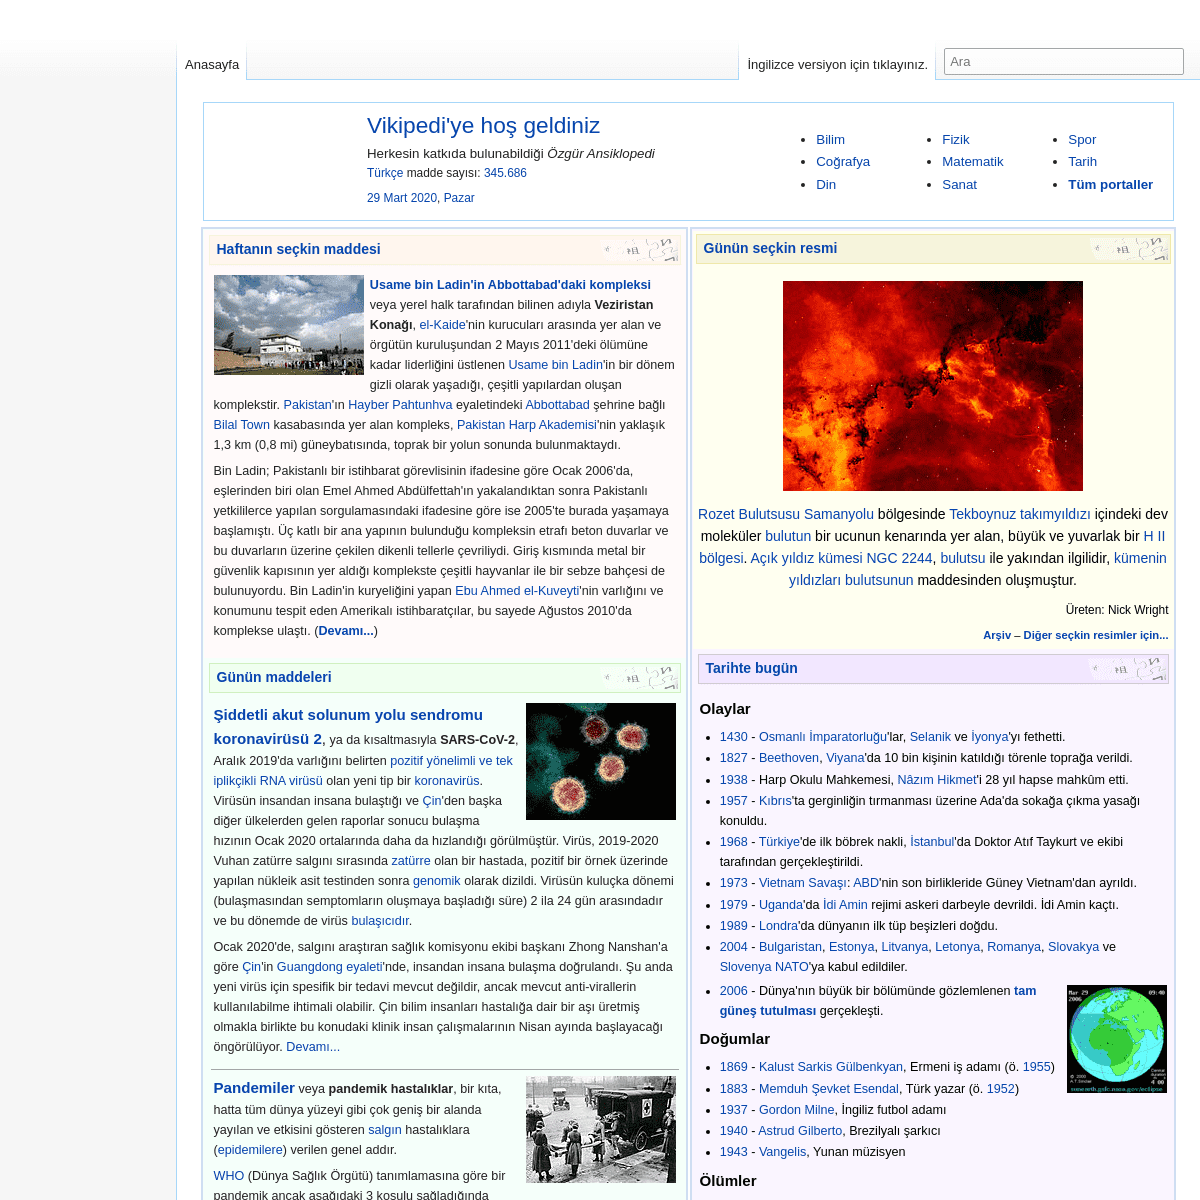 A complete backup of wikipediam.org